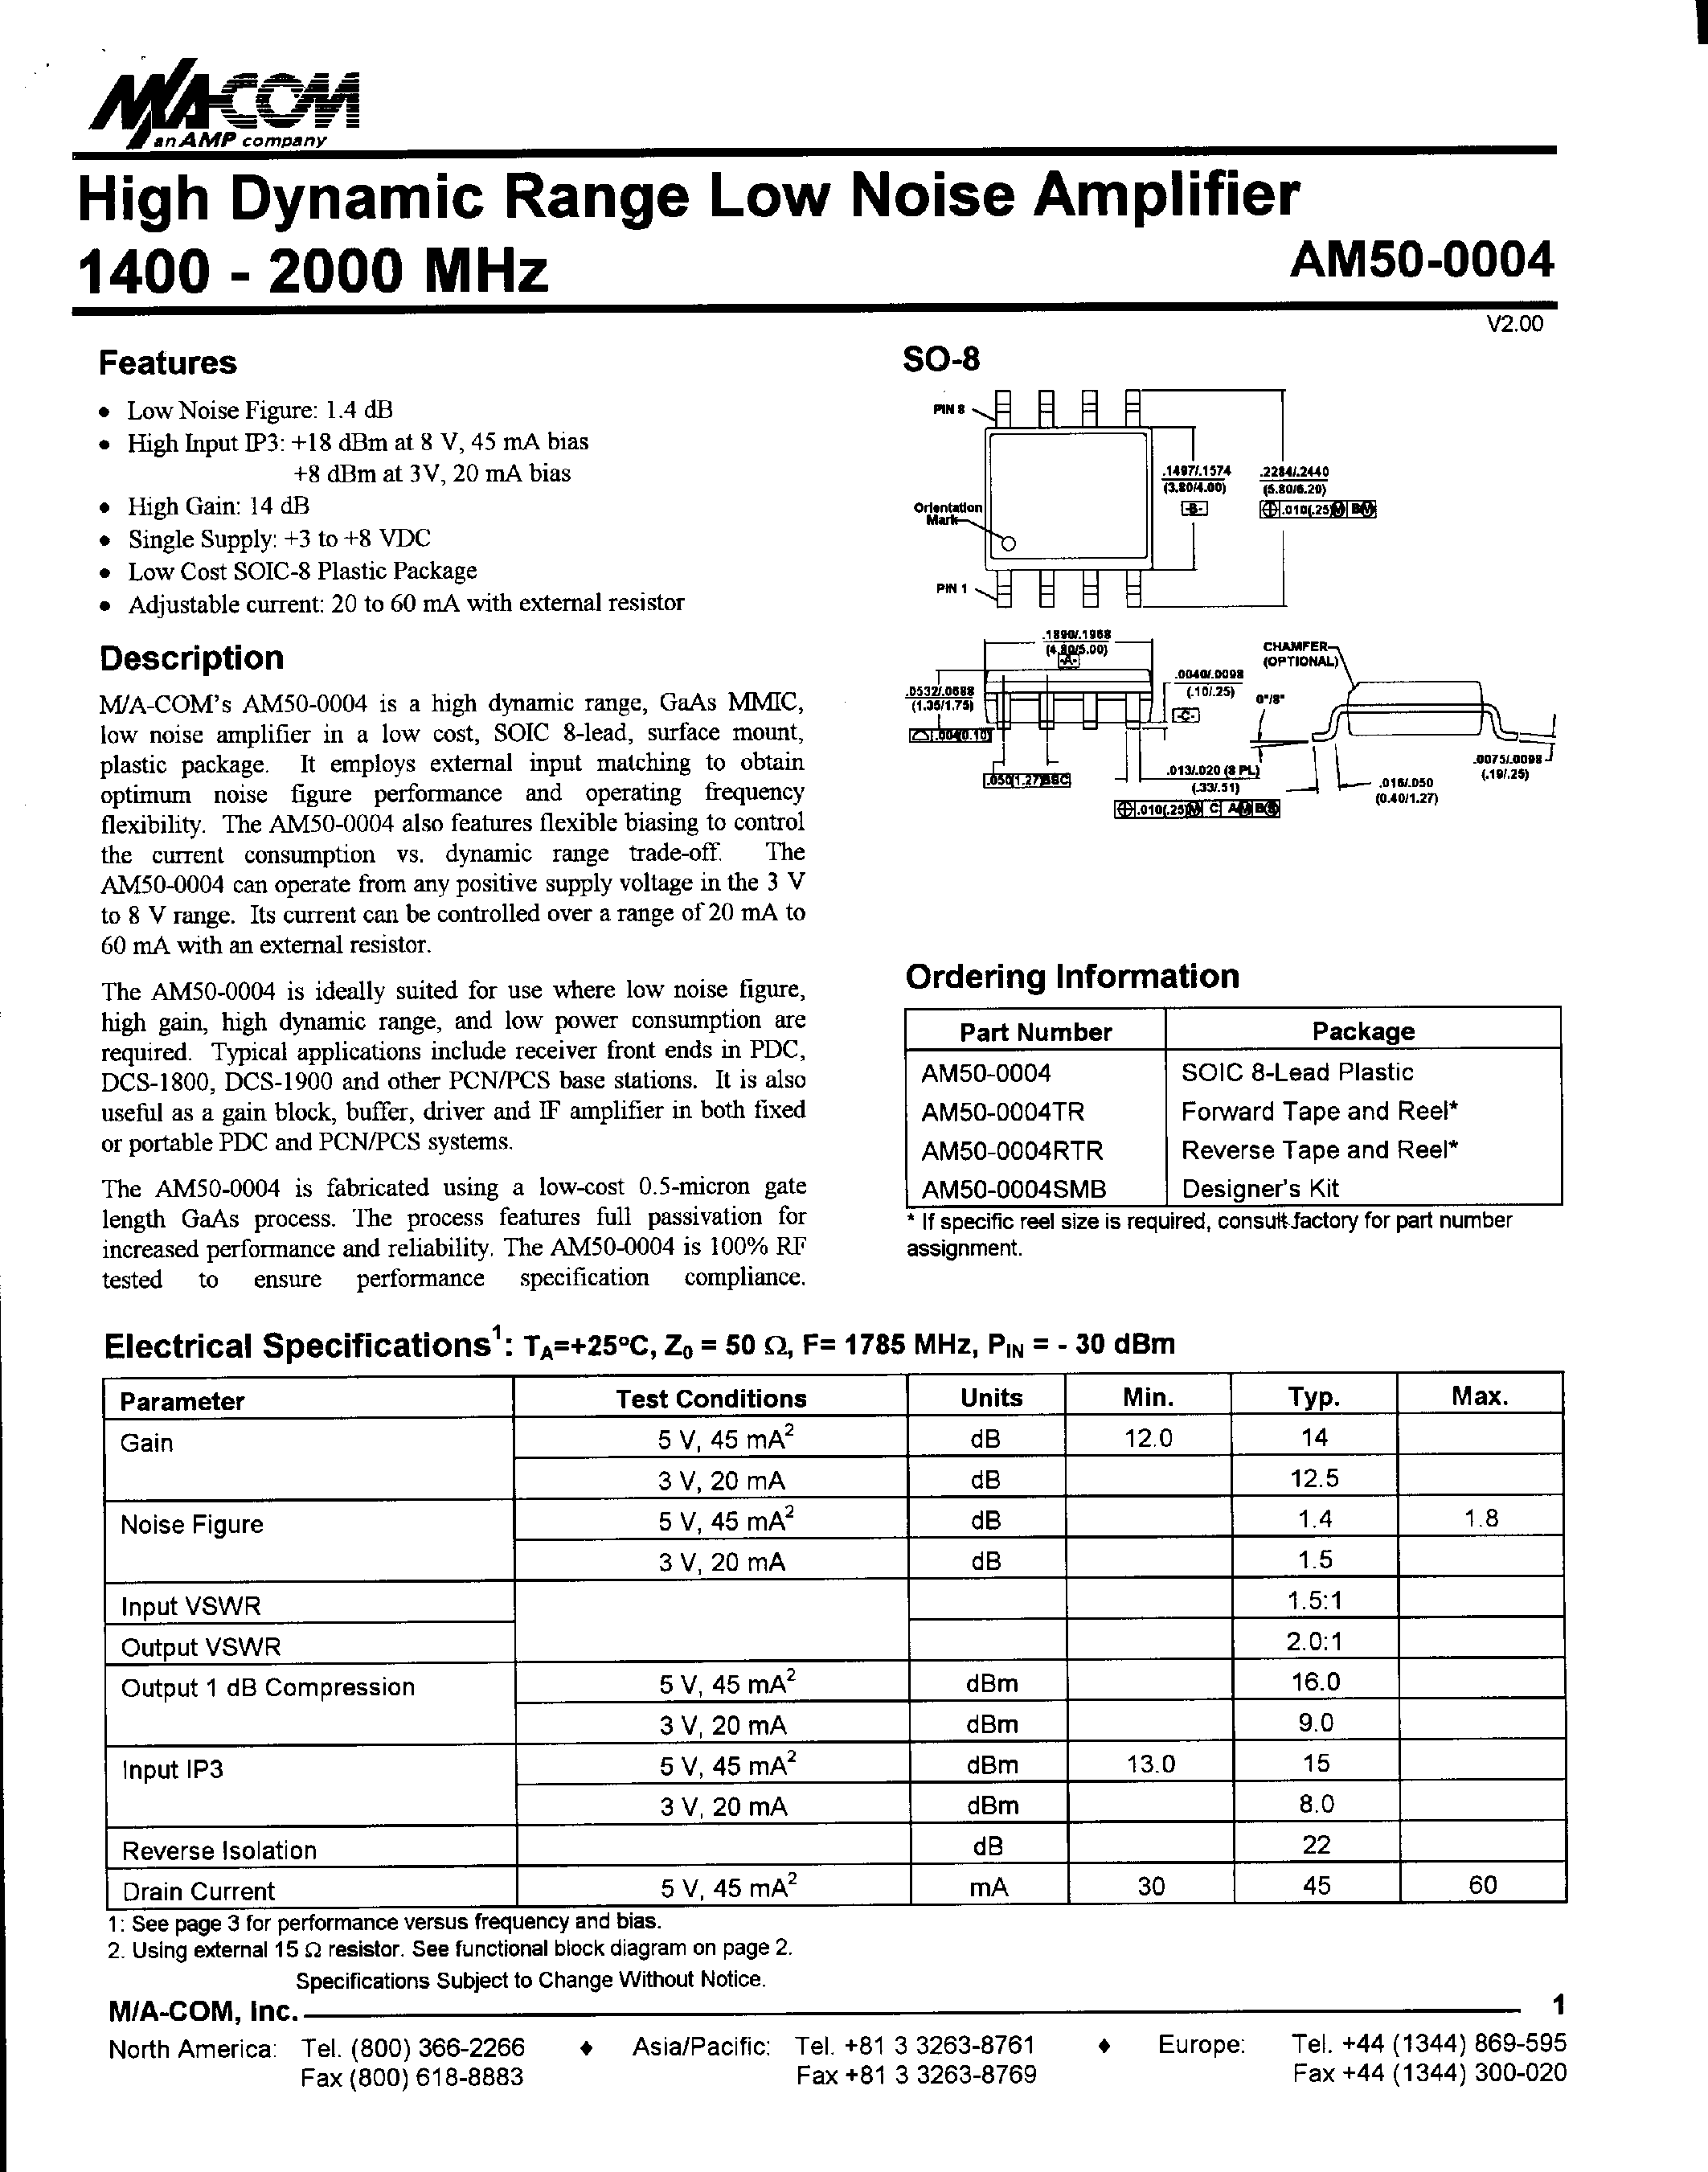 Datasheet AM50-0004 - High Dynamic Range Low Noise Amplifier 1400-2000 MHz page 1